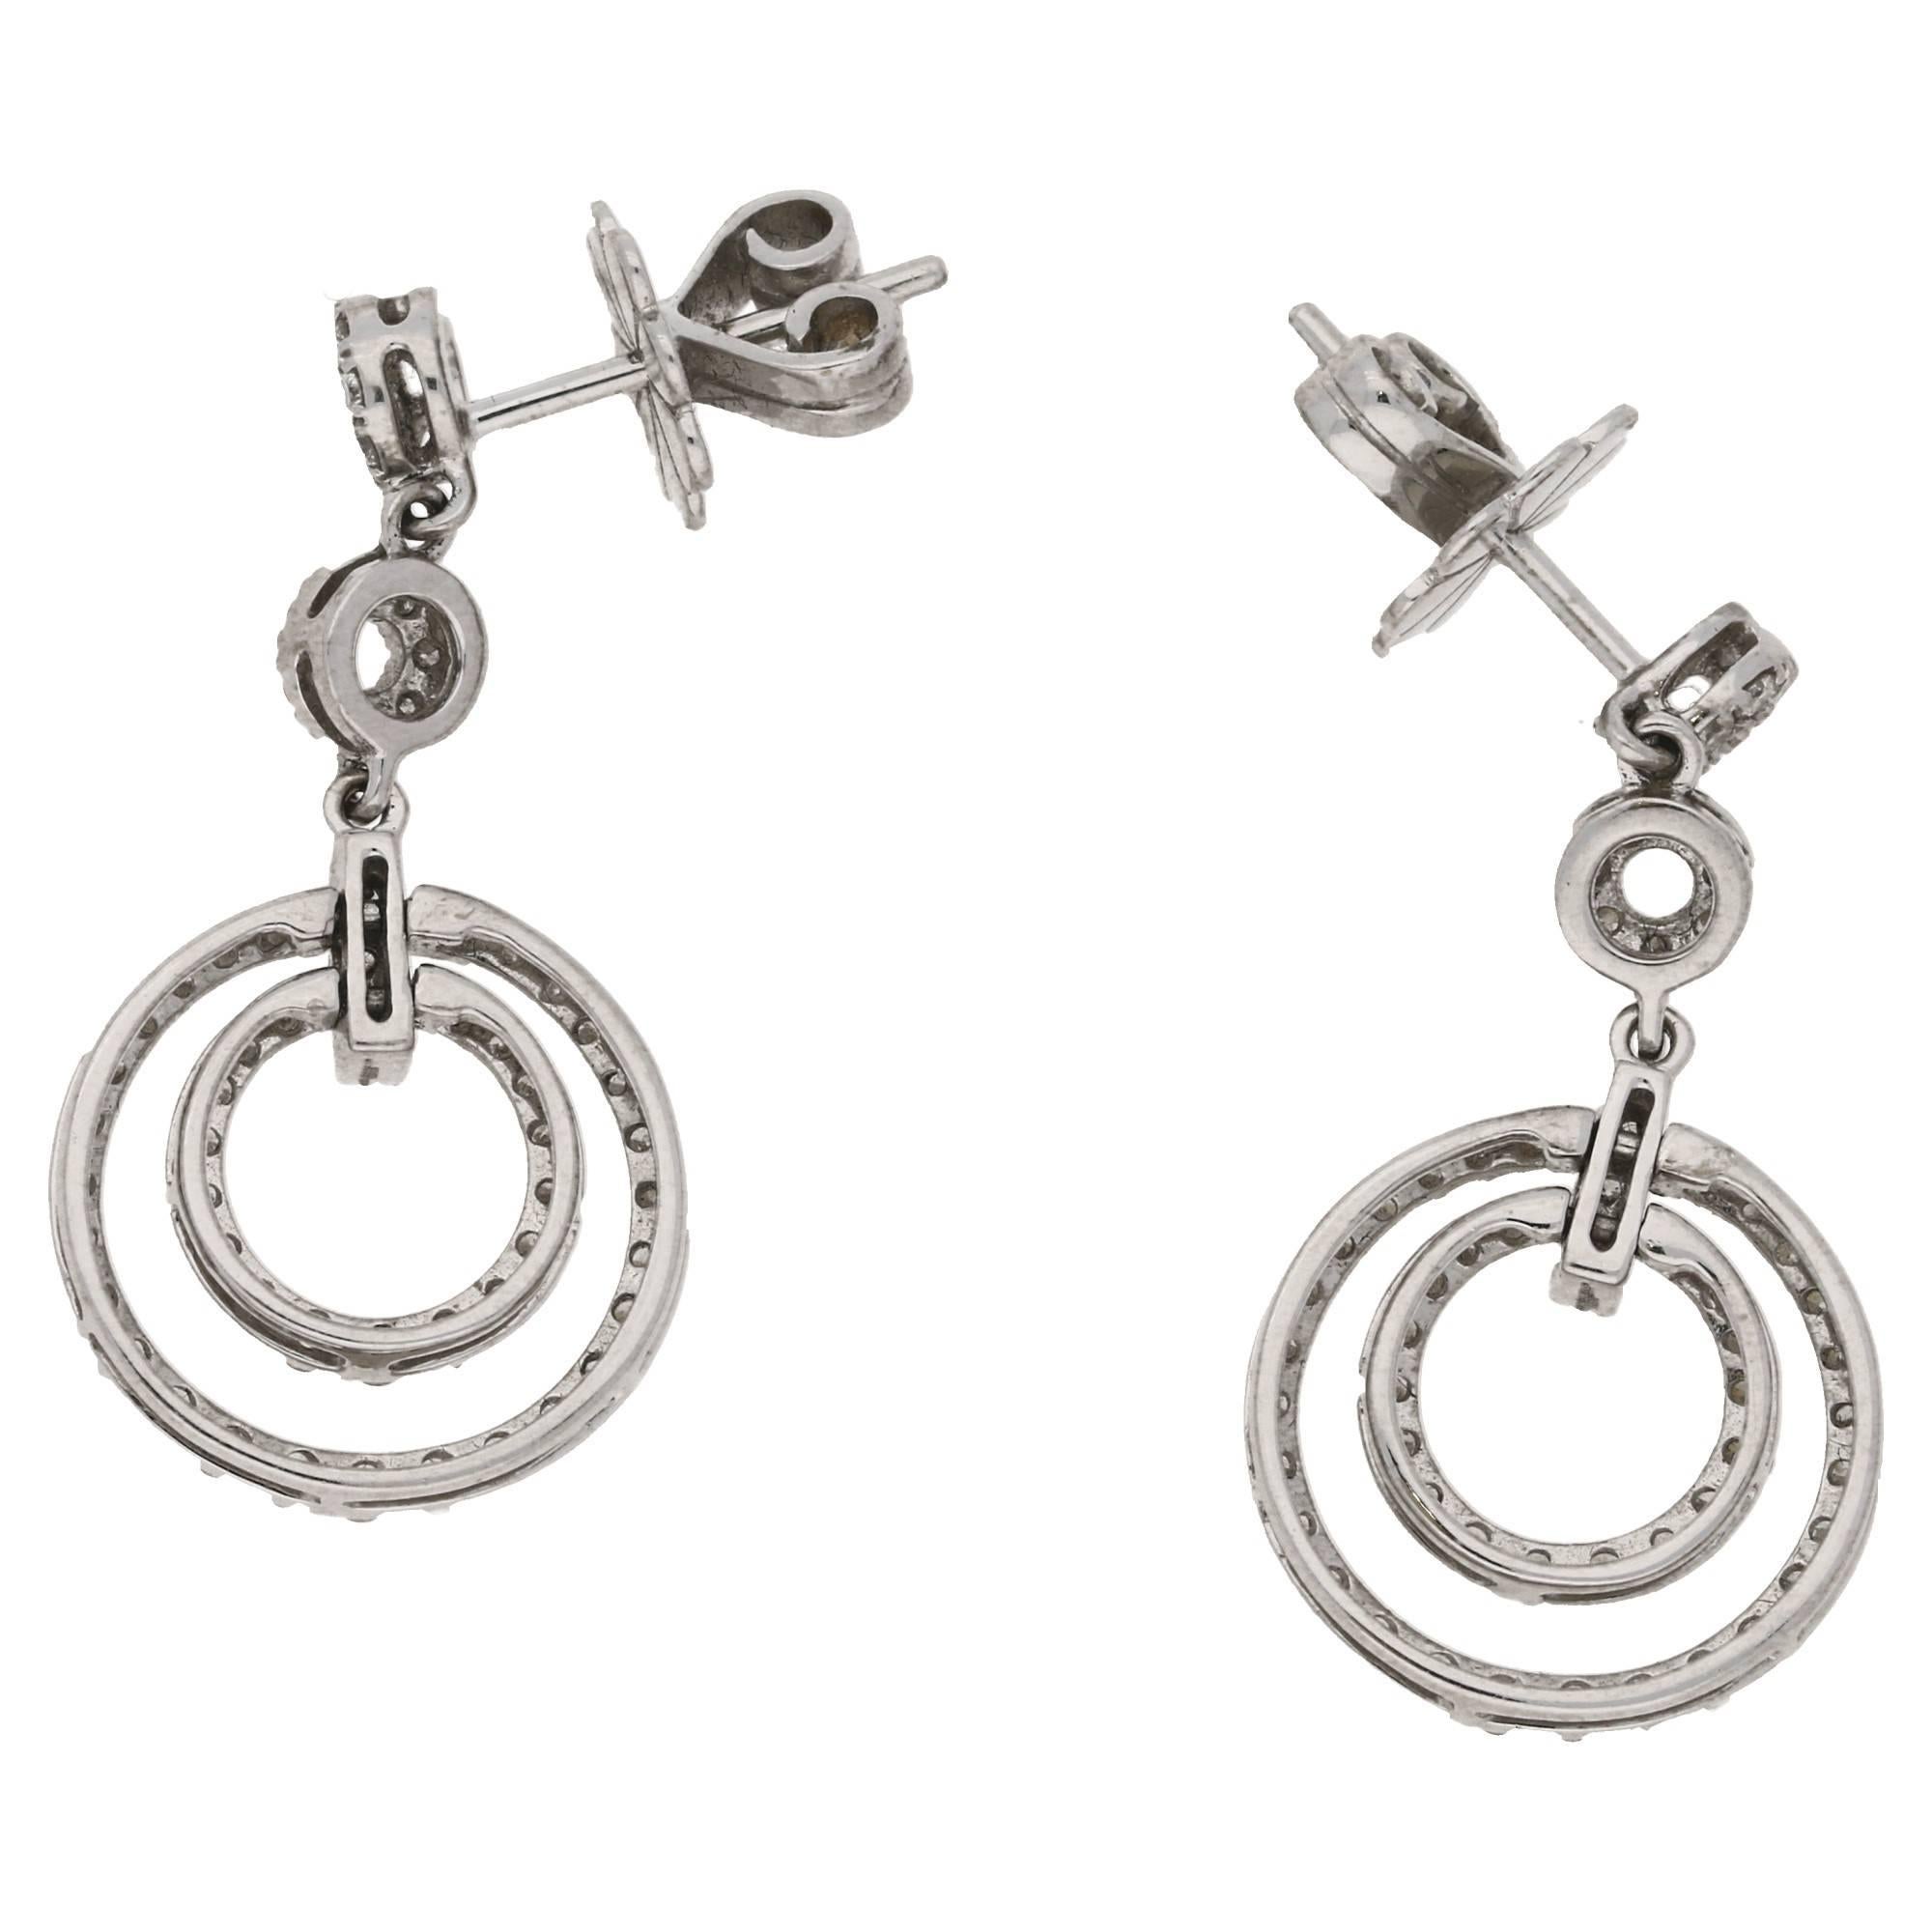 A pair of ravishing circle drop earrings with diamond pavé detail. With two large intersecting circlets channel and grain set hung from two further articulated diamond set circles. On post and butterfly fittings. Estimated total diamond weight: